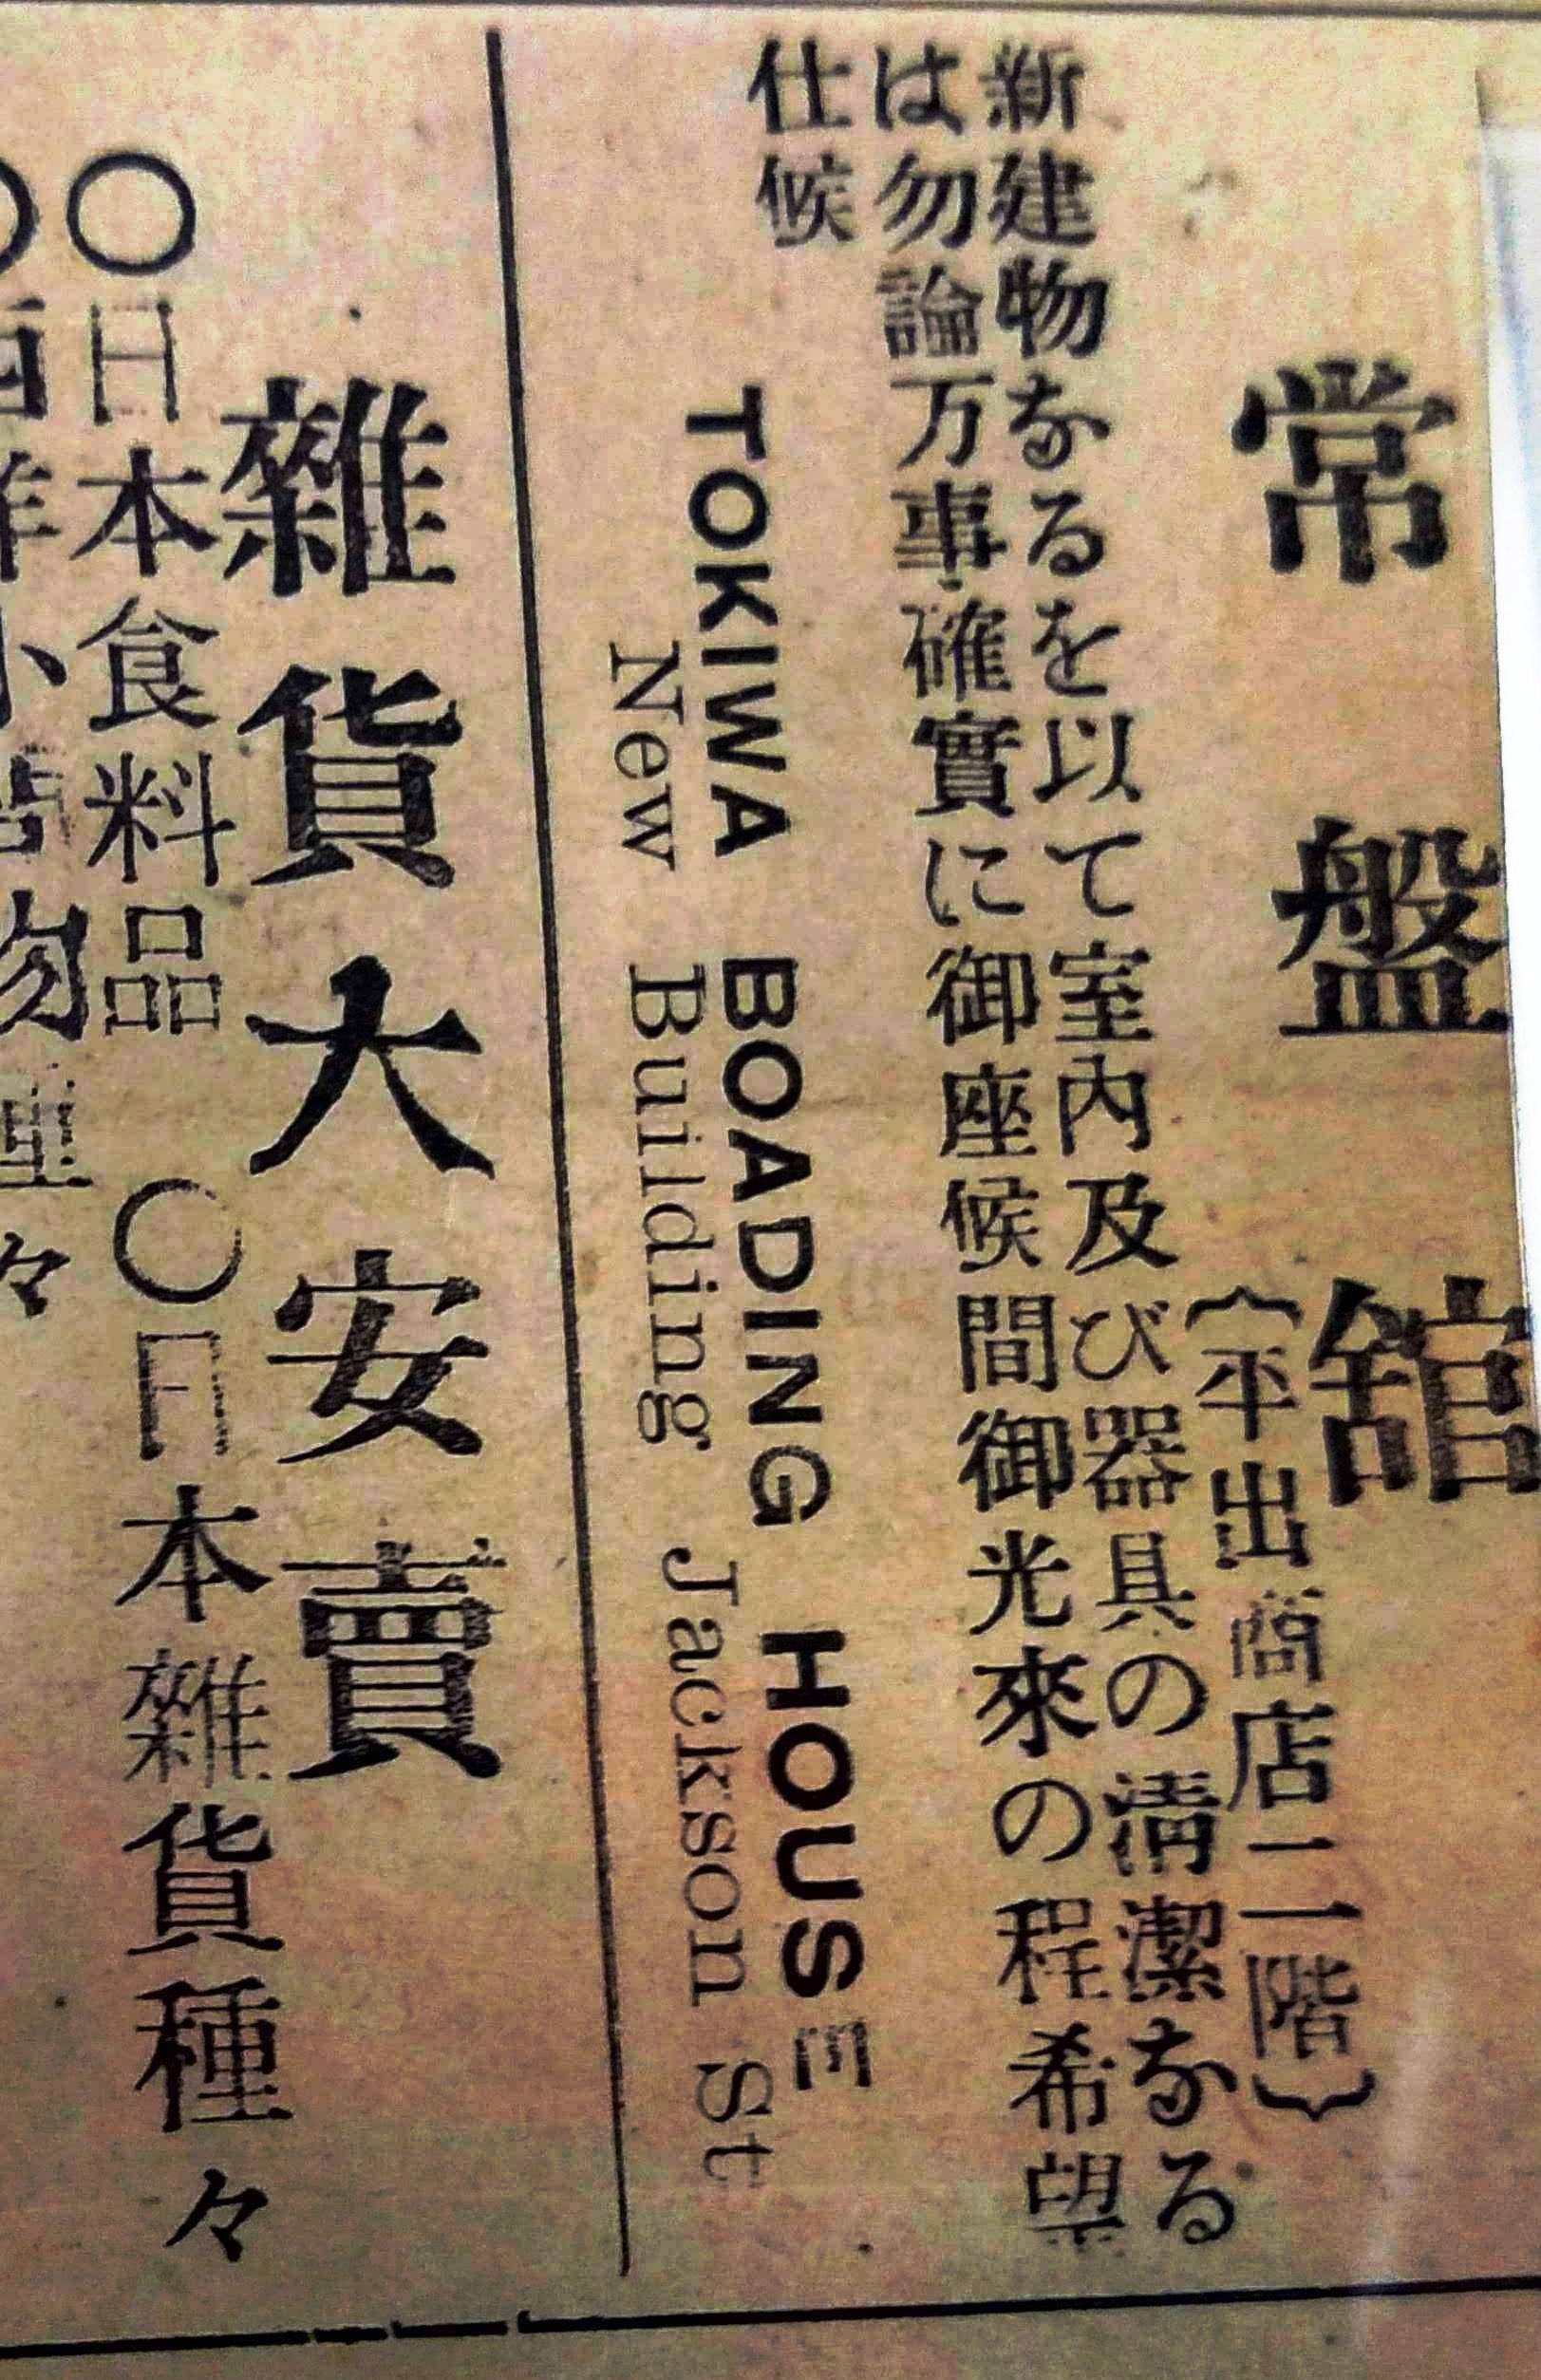 A Japanese newspaper ad with Japanese characters and English that reads "Tokiwa Boarding House," 